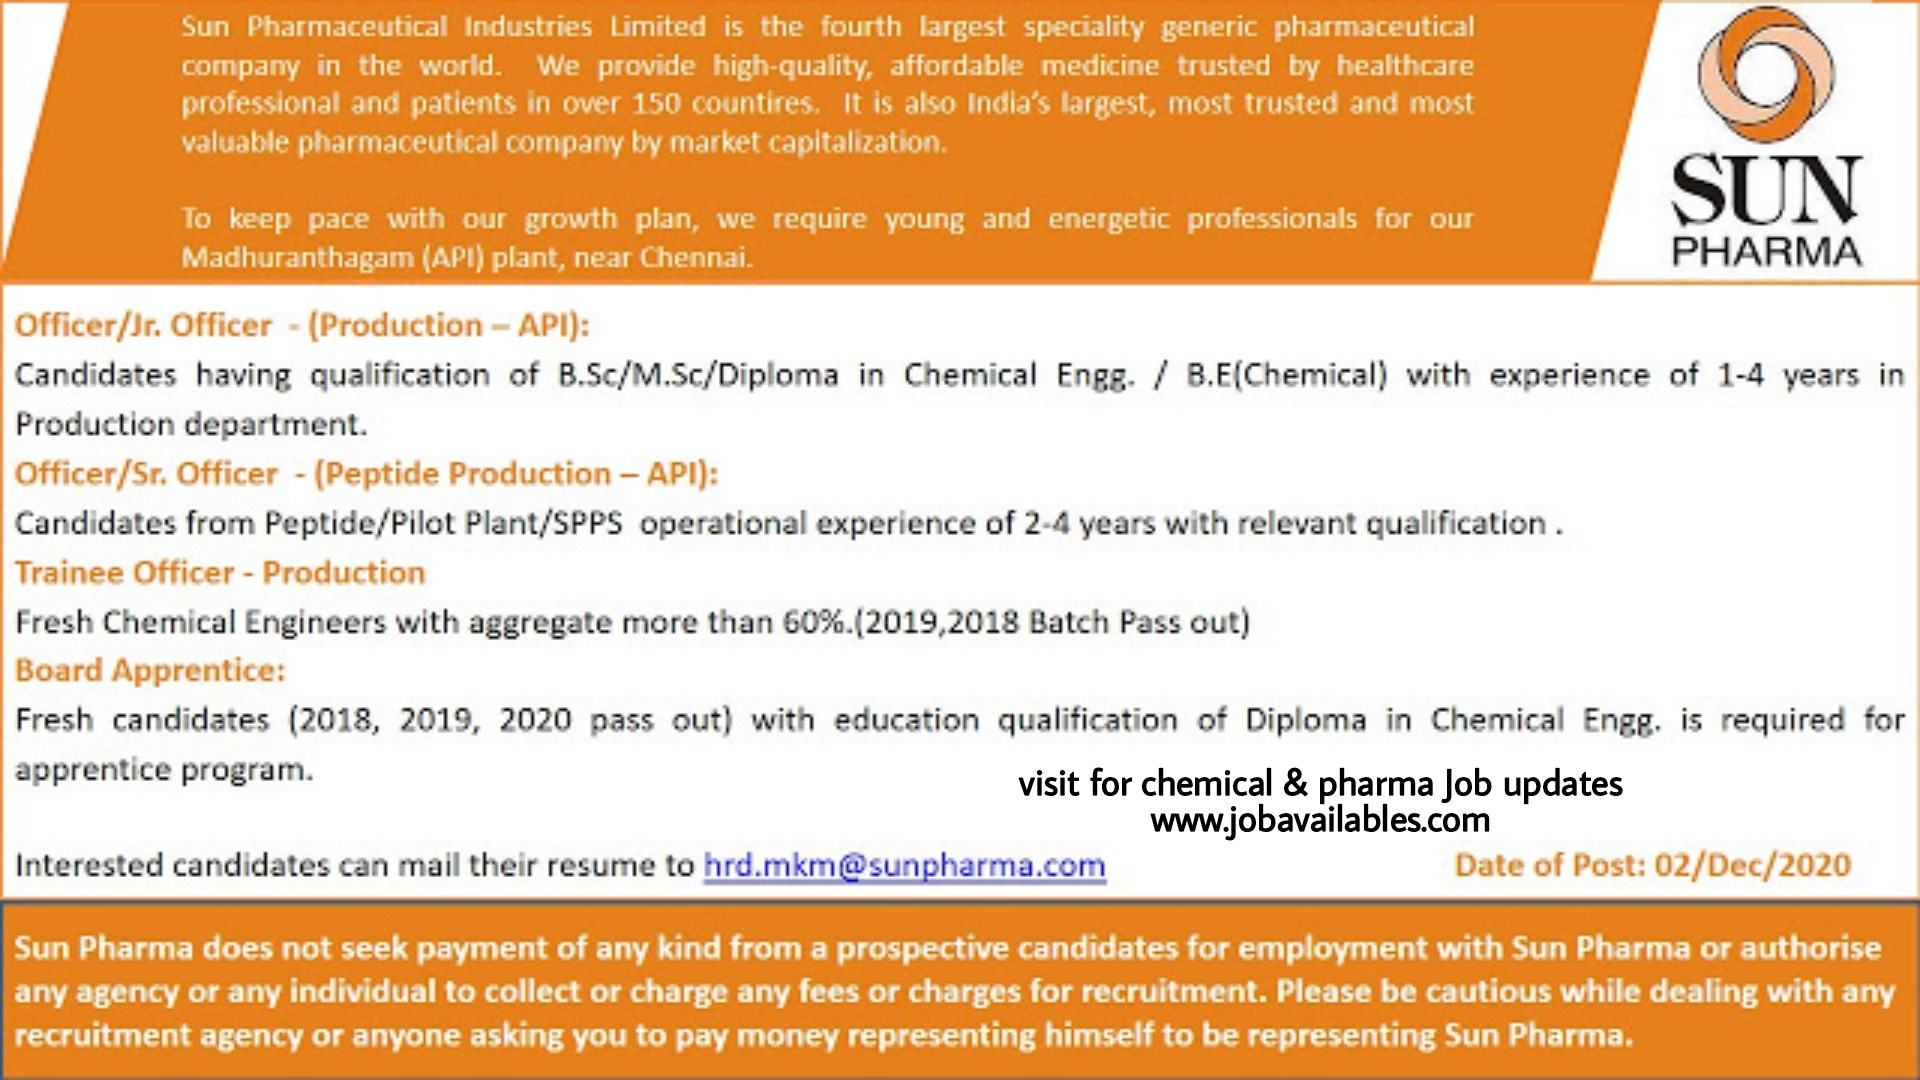 Job Availables, Sun Pharmaceuticals Ltd Job Opening For Freshers & Experienced Msc/ Bsc/ Diploma Chemical/ BE Chemical - Production/ Peptide Production/ Board Apprentices